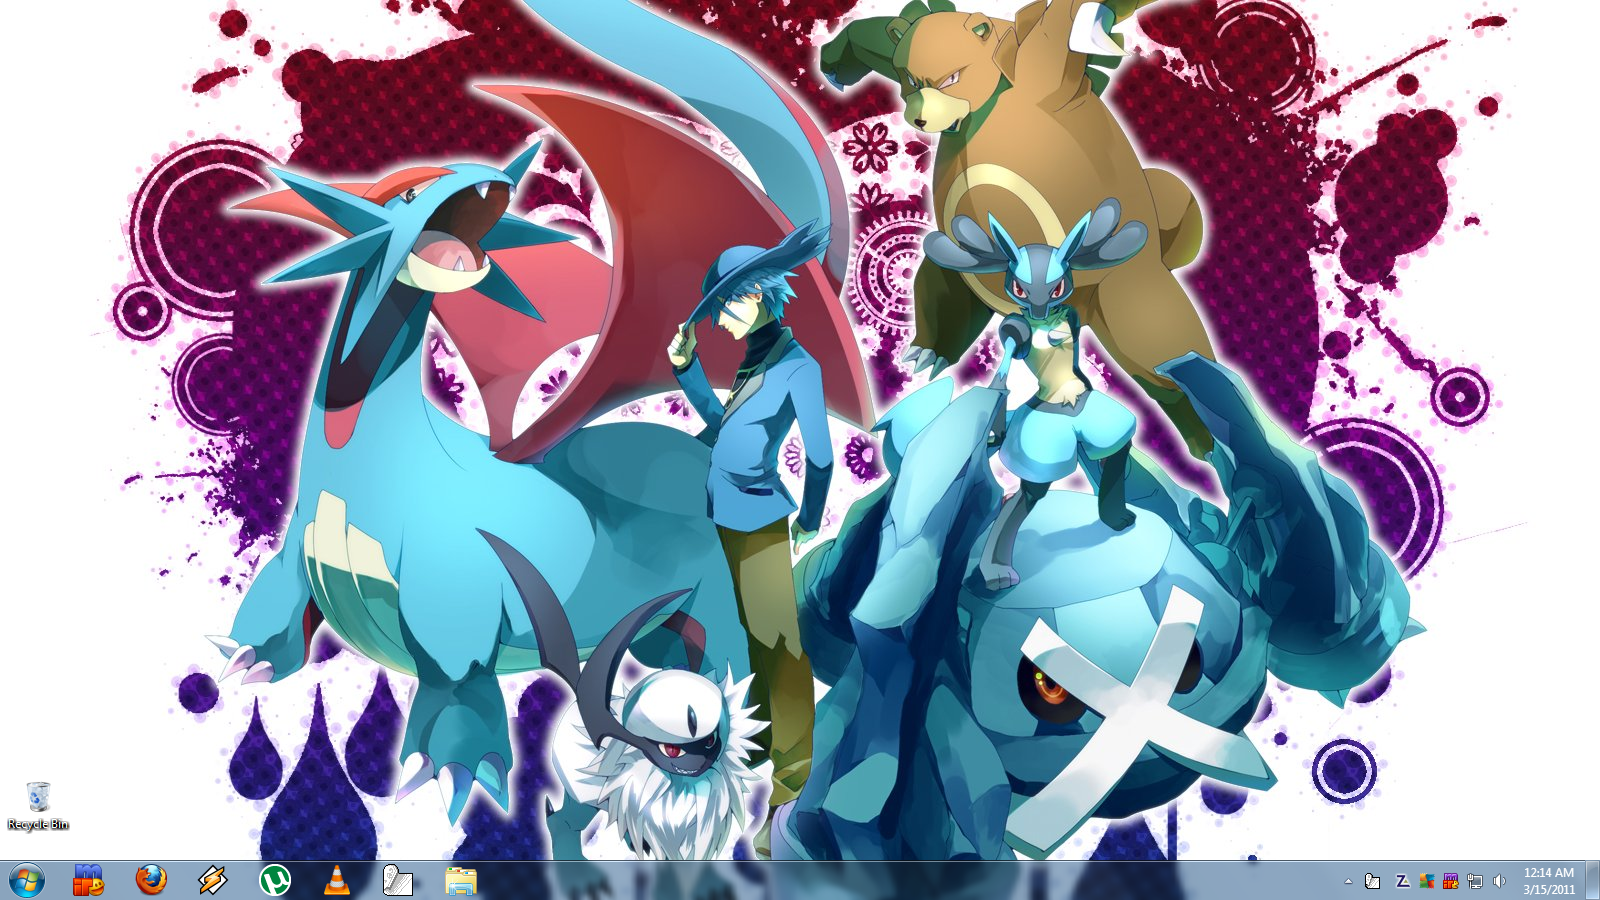 Wallpaper, Pokemon, Salamence, Lucario, Absol Pictures, Wallpapers.